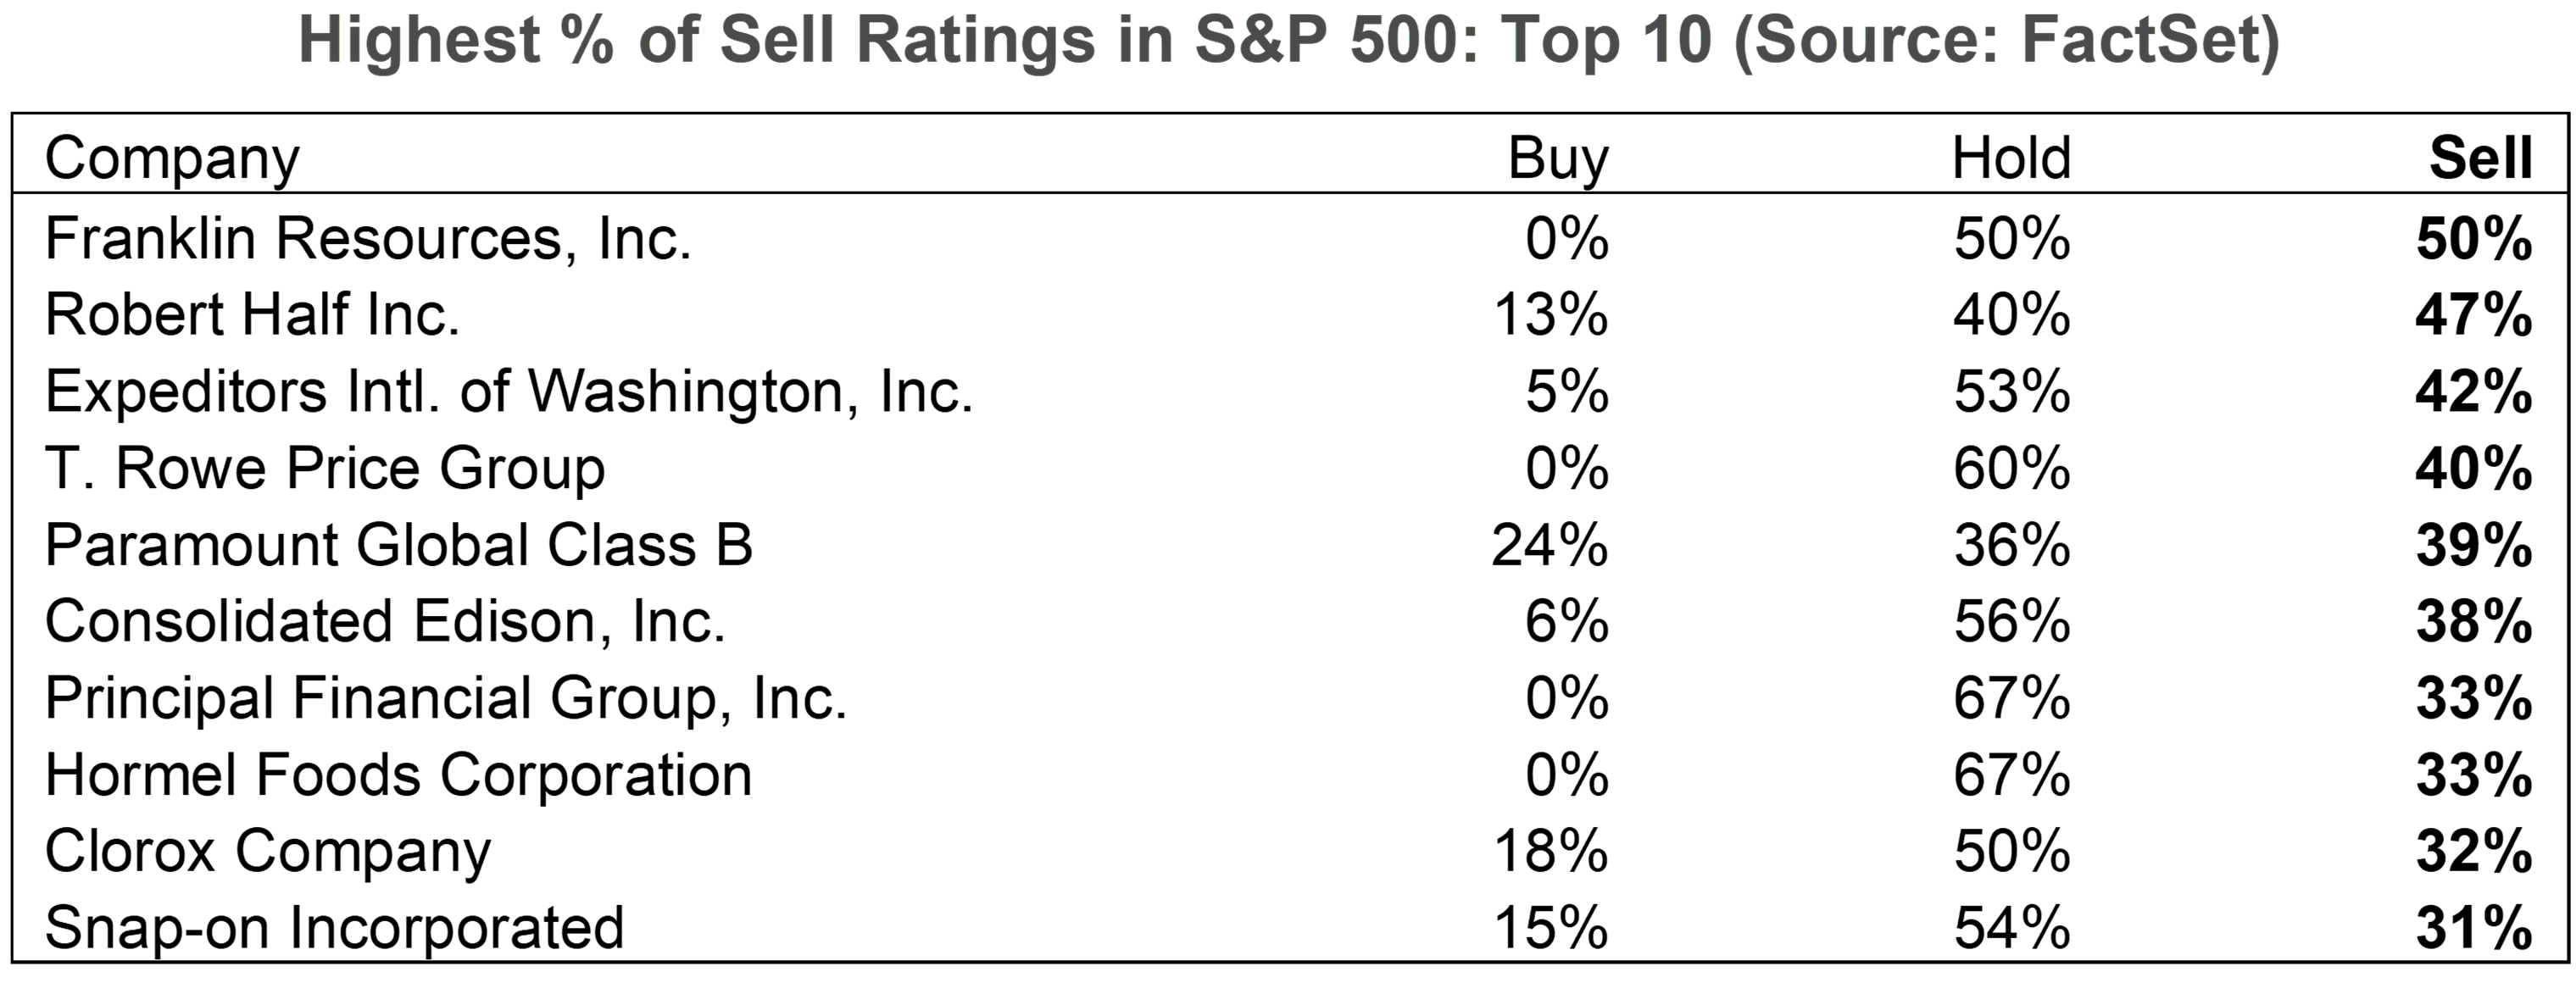 003-highest-percent-of-sell-ratings-in-s&p-500-top-10